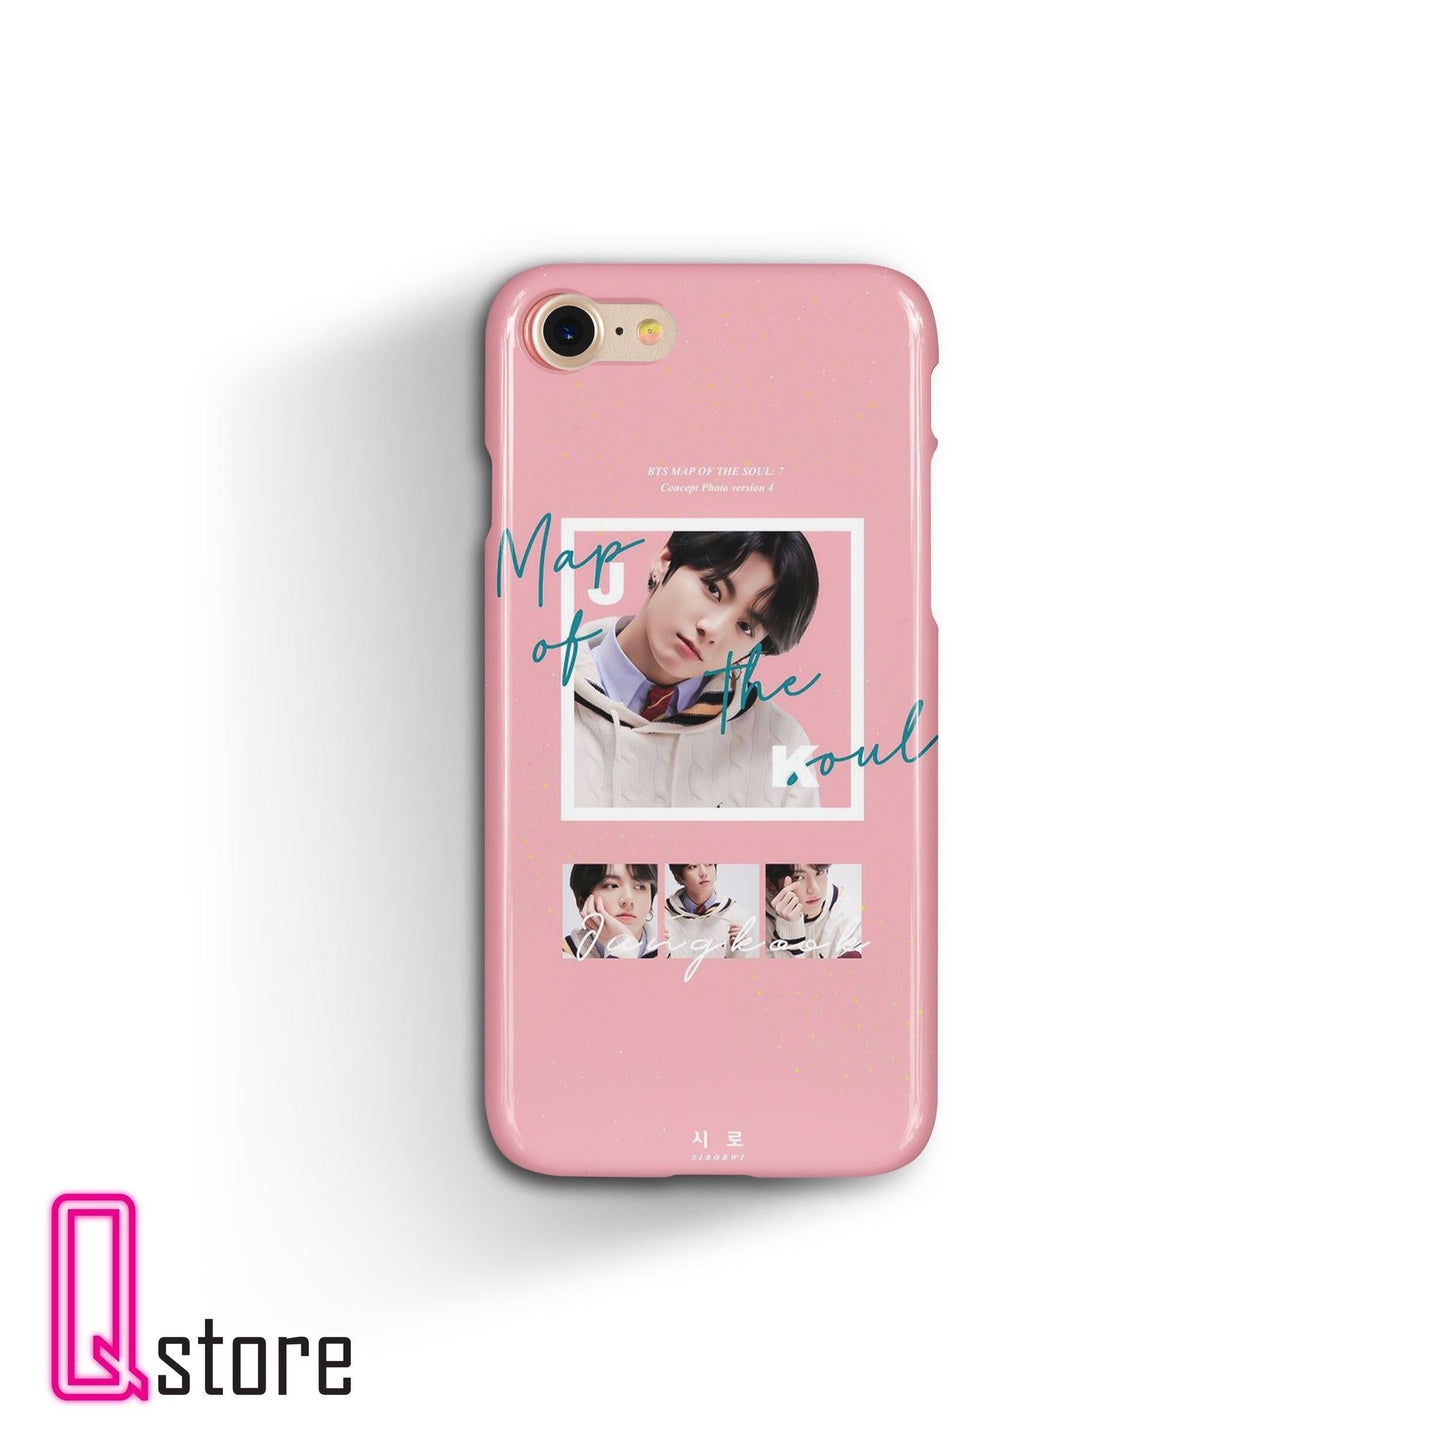 Bts.10 phone cover - Qcase Store | Everyday Case